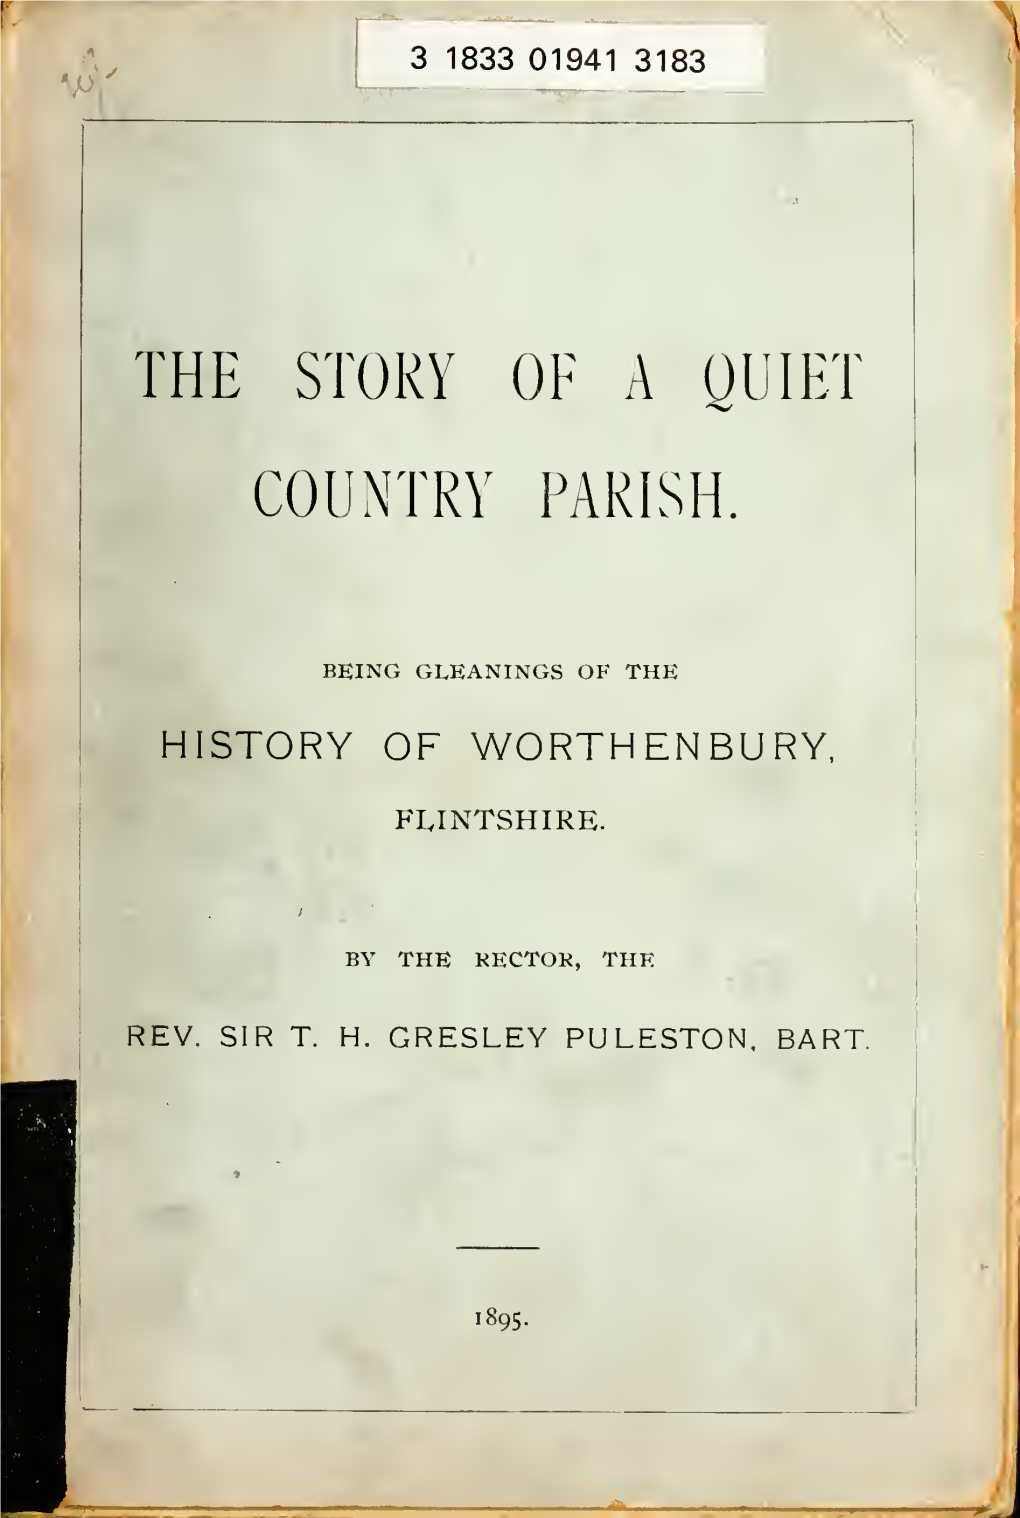 The Story of a Quiet Country Parish, Being Gleanings of the History of Worthenbury, Flintshire